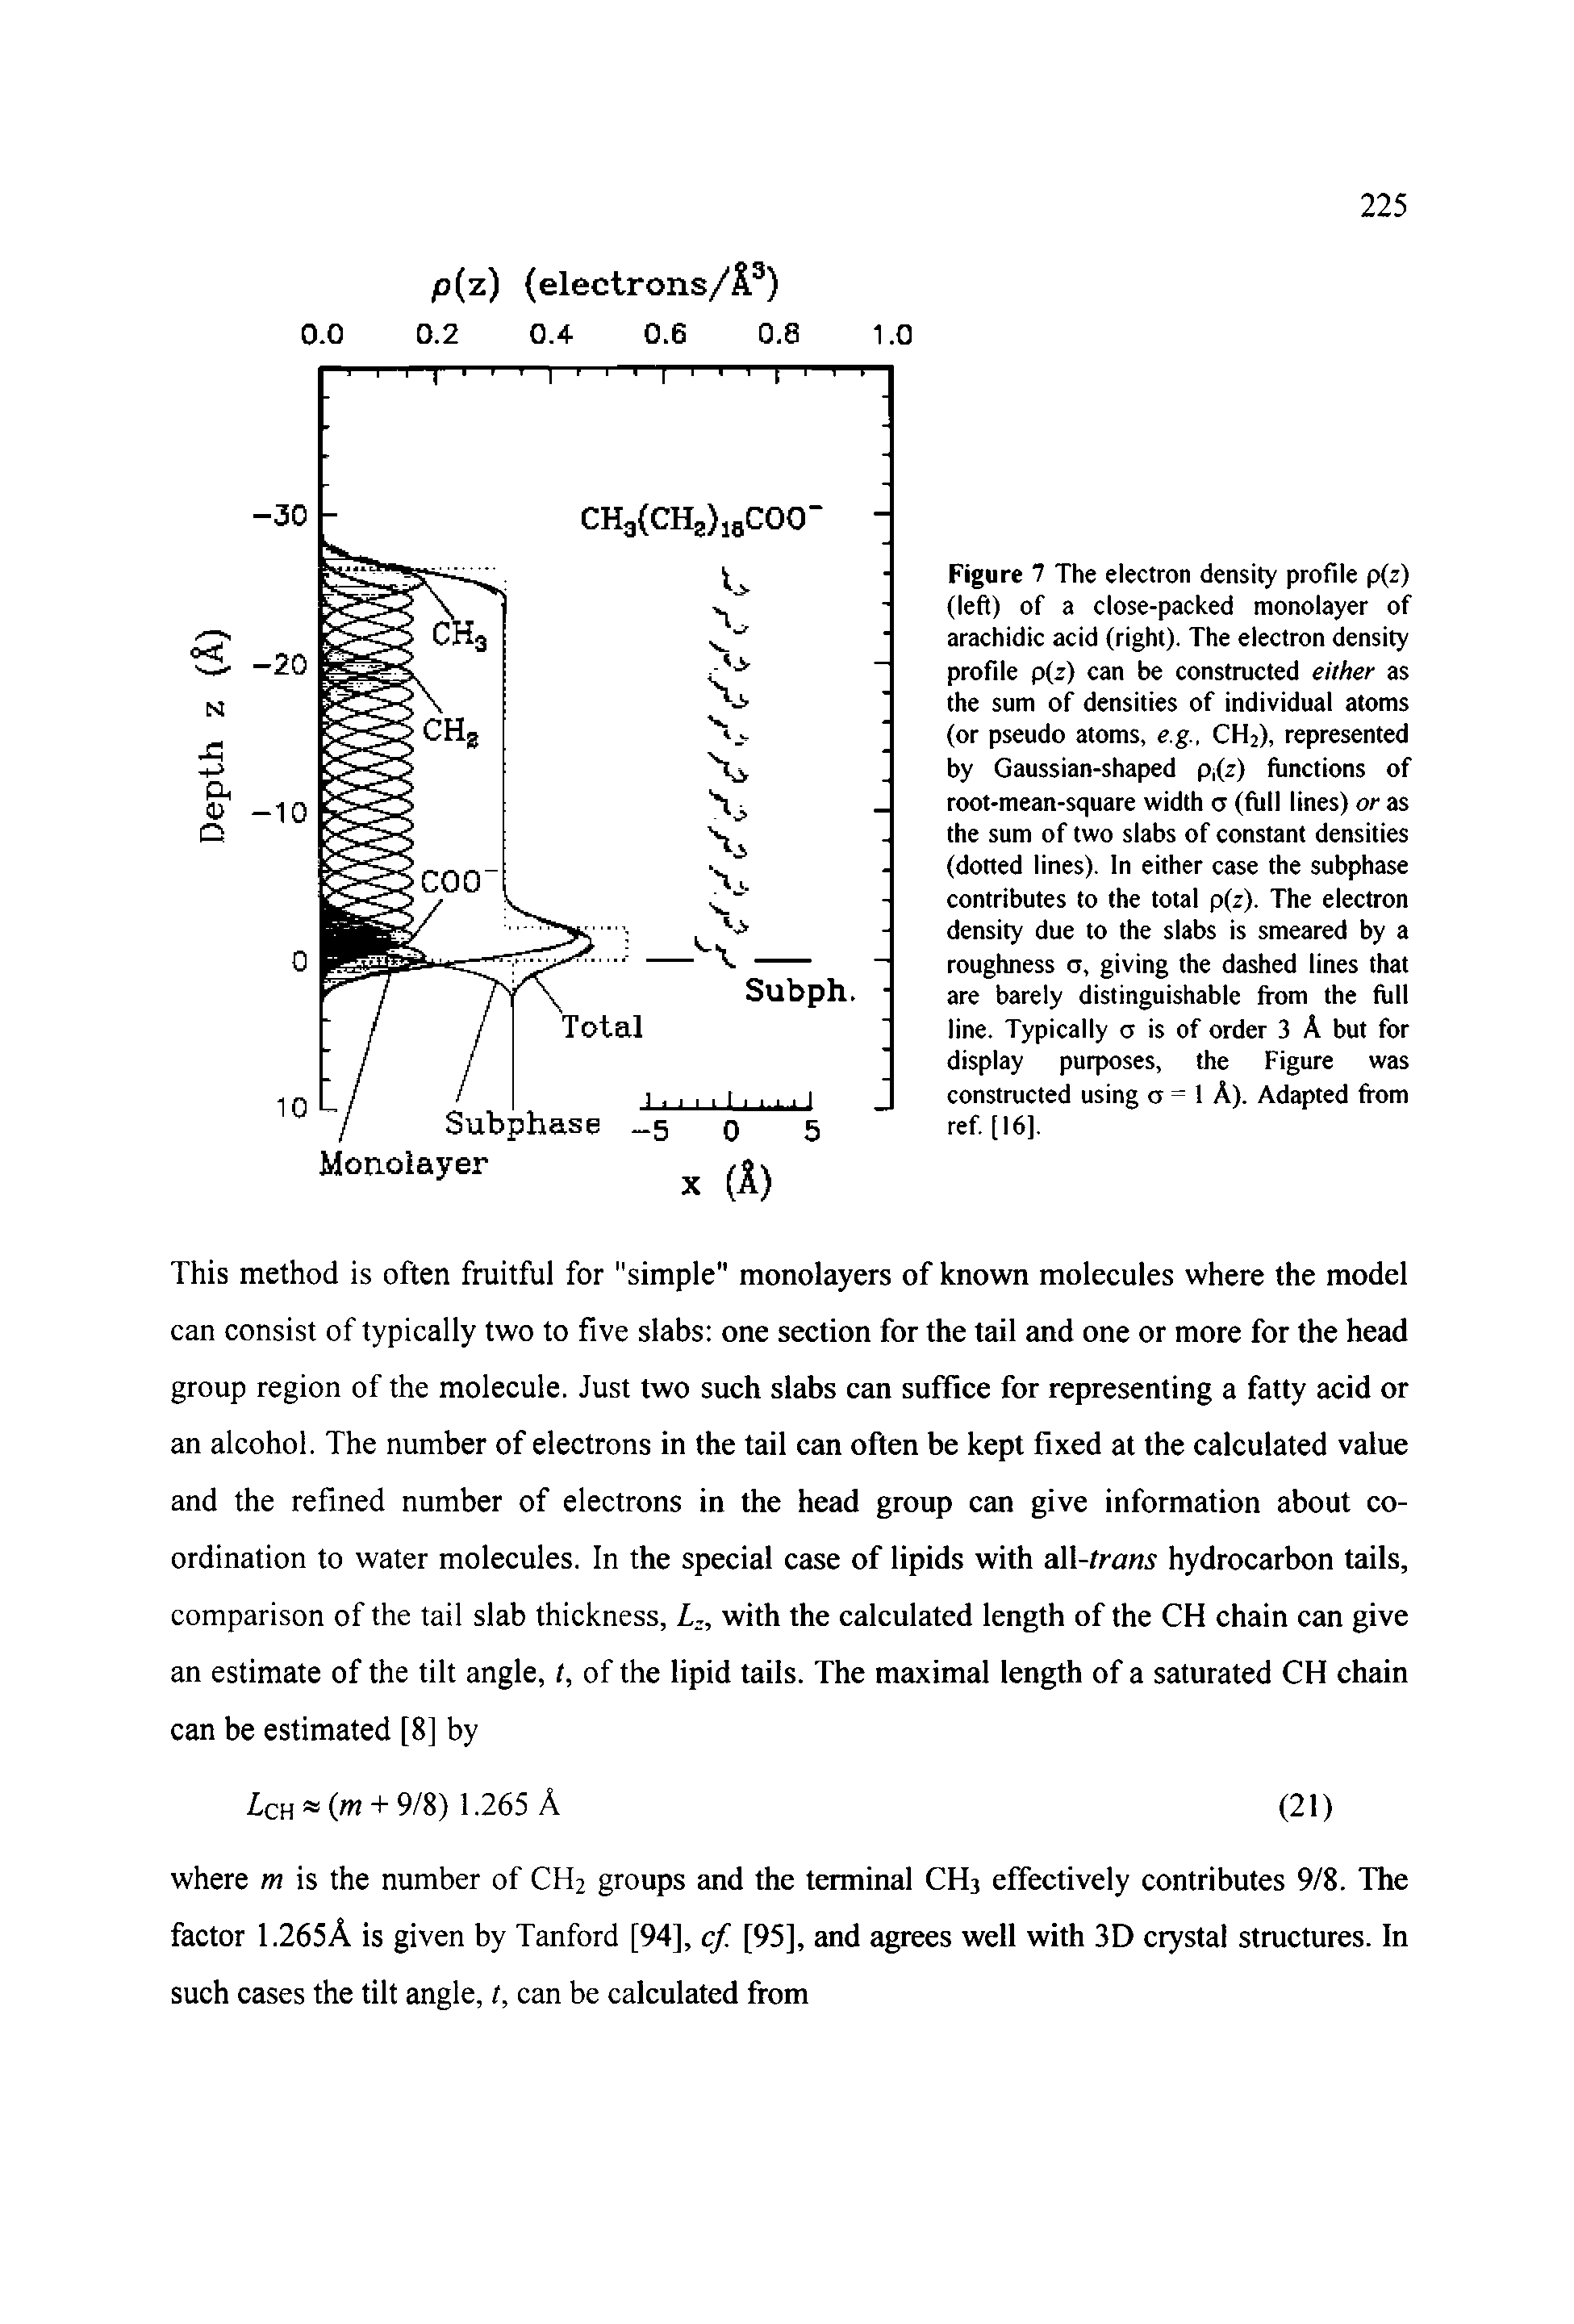 Figure 7 The electron density profile p(z) (left) of a close-packed monolayer of arachidic acid (right). The electron density profile p(z) can be constructed either as the sum of densities of individual atoms (or pseudo atoms, e.g., CH2), represented by Gaussian-shaped Pi(z) functions of root-mean-square width a (full lines) or as the sum of two slabs of constant densities (dotted lines). In either case the subphase contributes to the total p(z). The electron density due to the slabs is smeared by a roughness a, giving the dashed lines that are barely distinguishable ii om the full line. Typically o is of order 3 A but for display purposes, the Figure was constructed using o = 1 A). Adapted from ref. [16],...